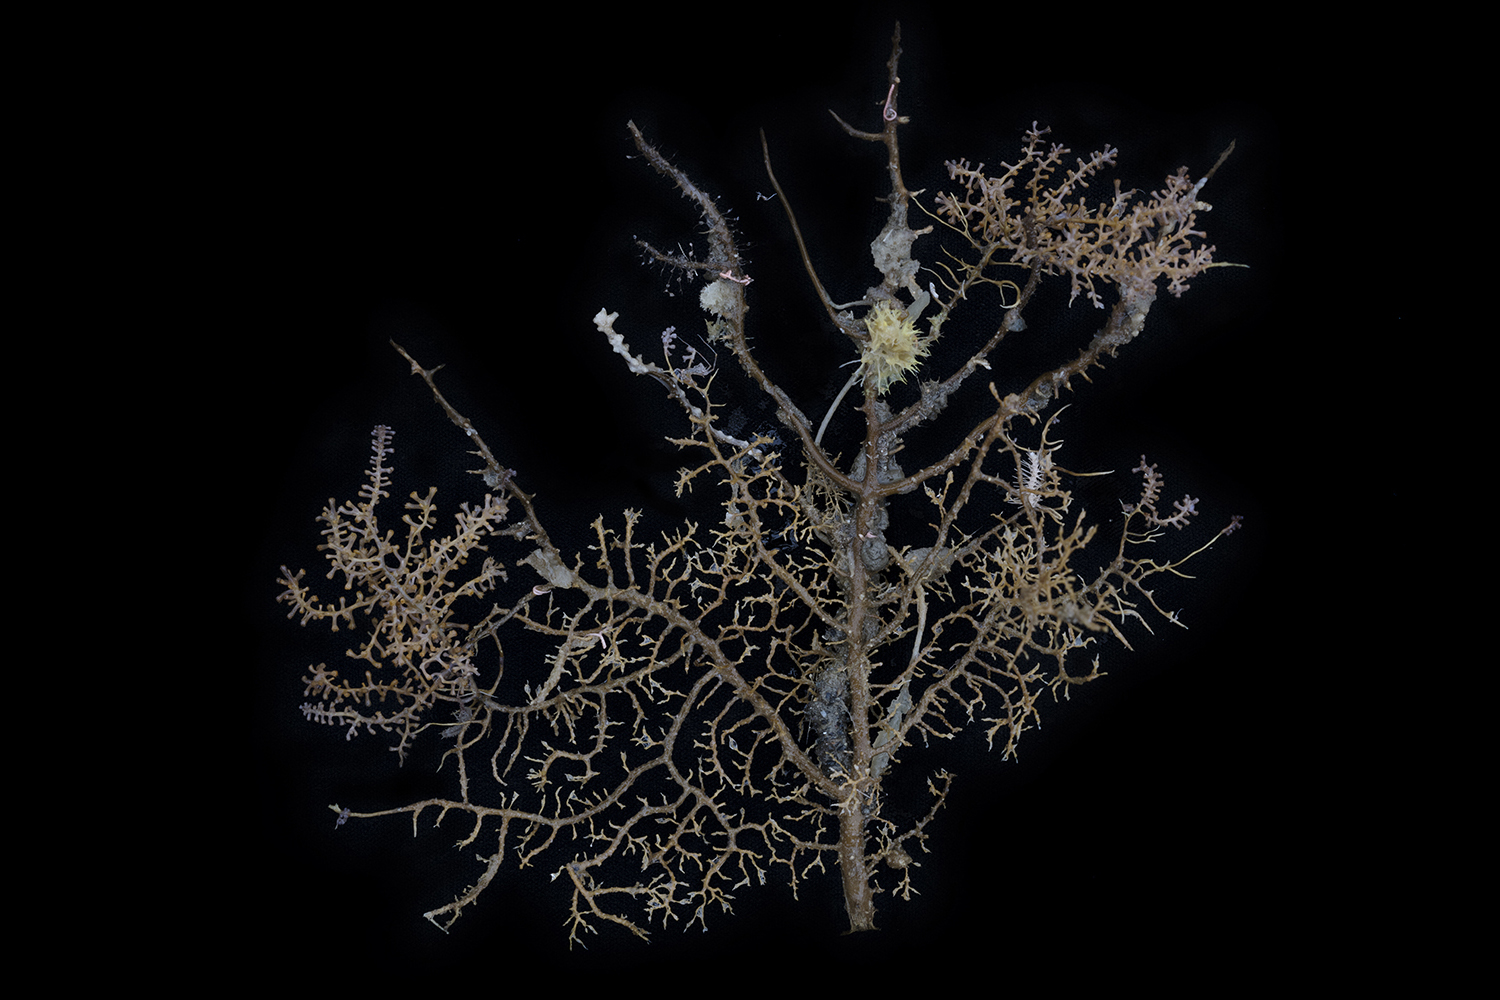 A dead gorgonian coral skeleton provides substrate and habitat for many other species including zoanthid polyps, antarcturid isopods (crustaceans), demosponges  hexactinellid glass sponges and tube-dwelling polychaete worms. Collected at around 560 meters depth off Lecointe Island in the Gerlache Strait, Antarctic Peninsula.